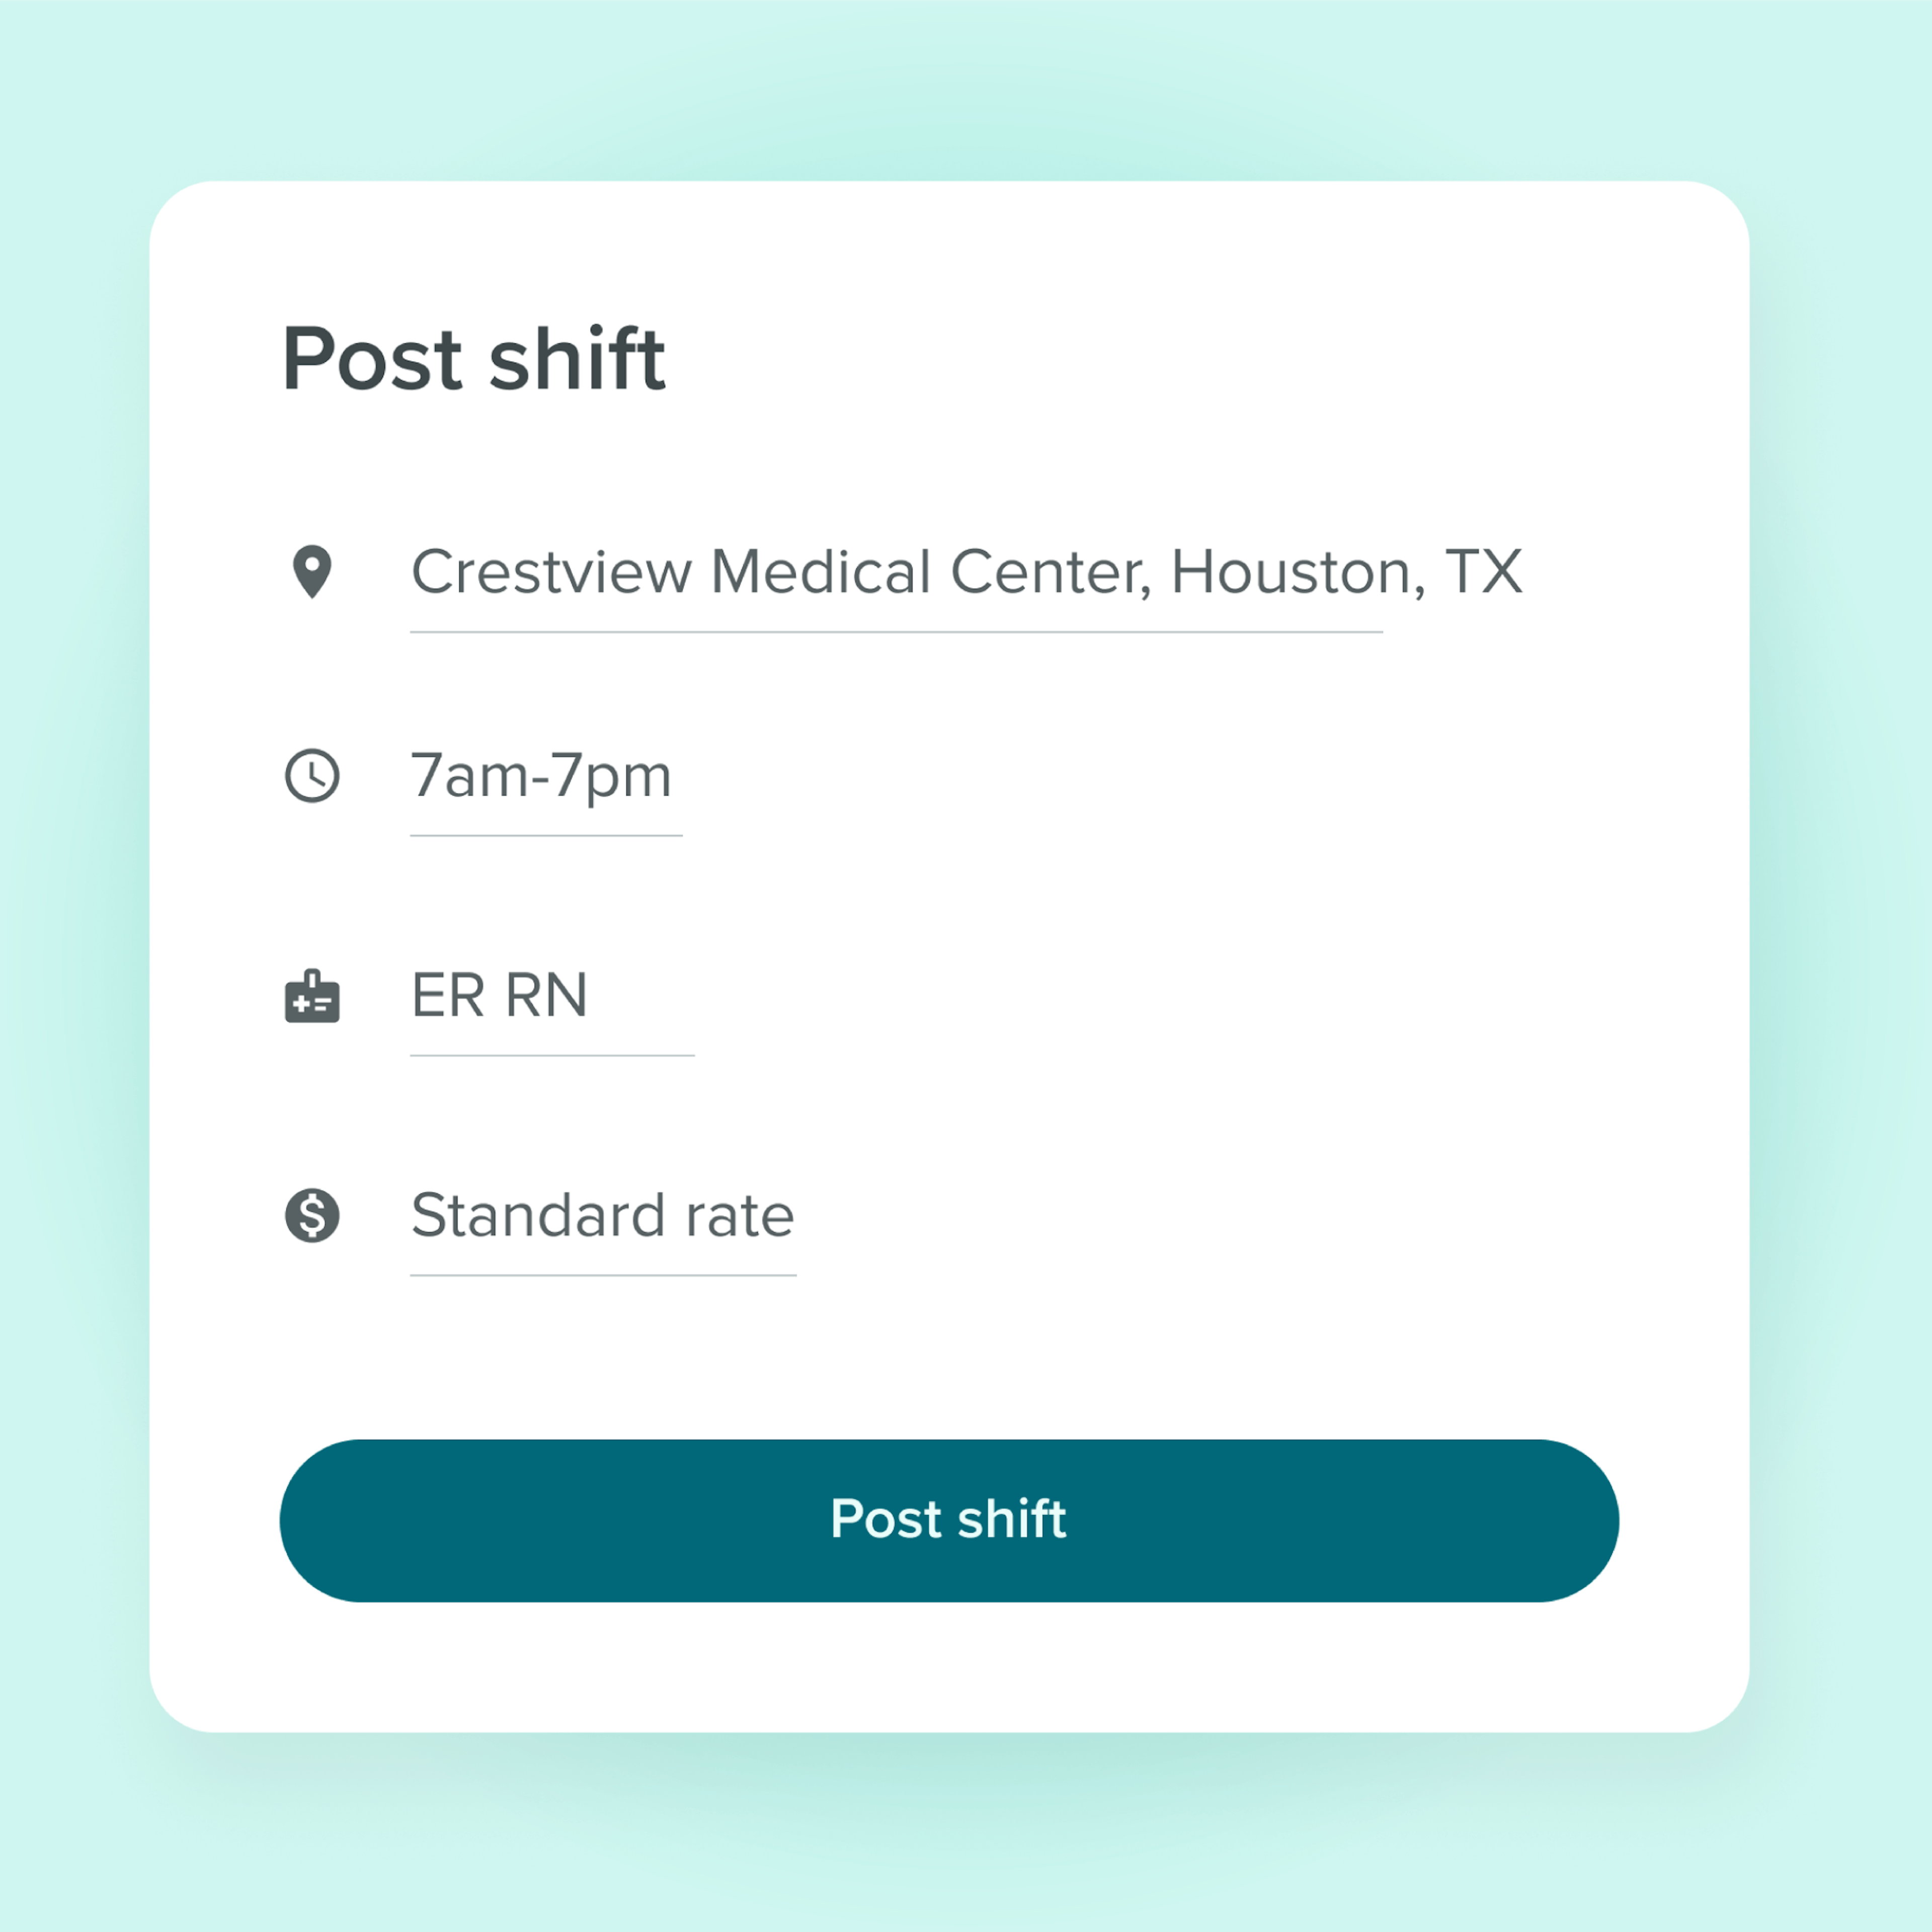 Post shift UI from Medely' Healthcare Talent Marketplace